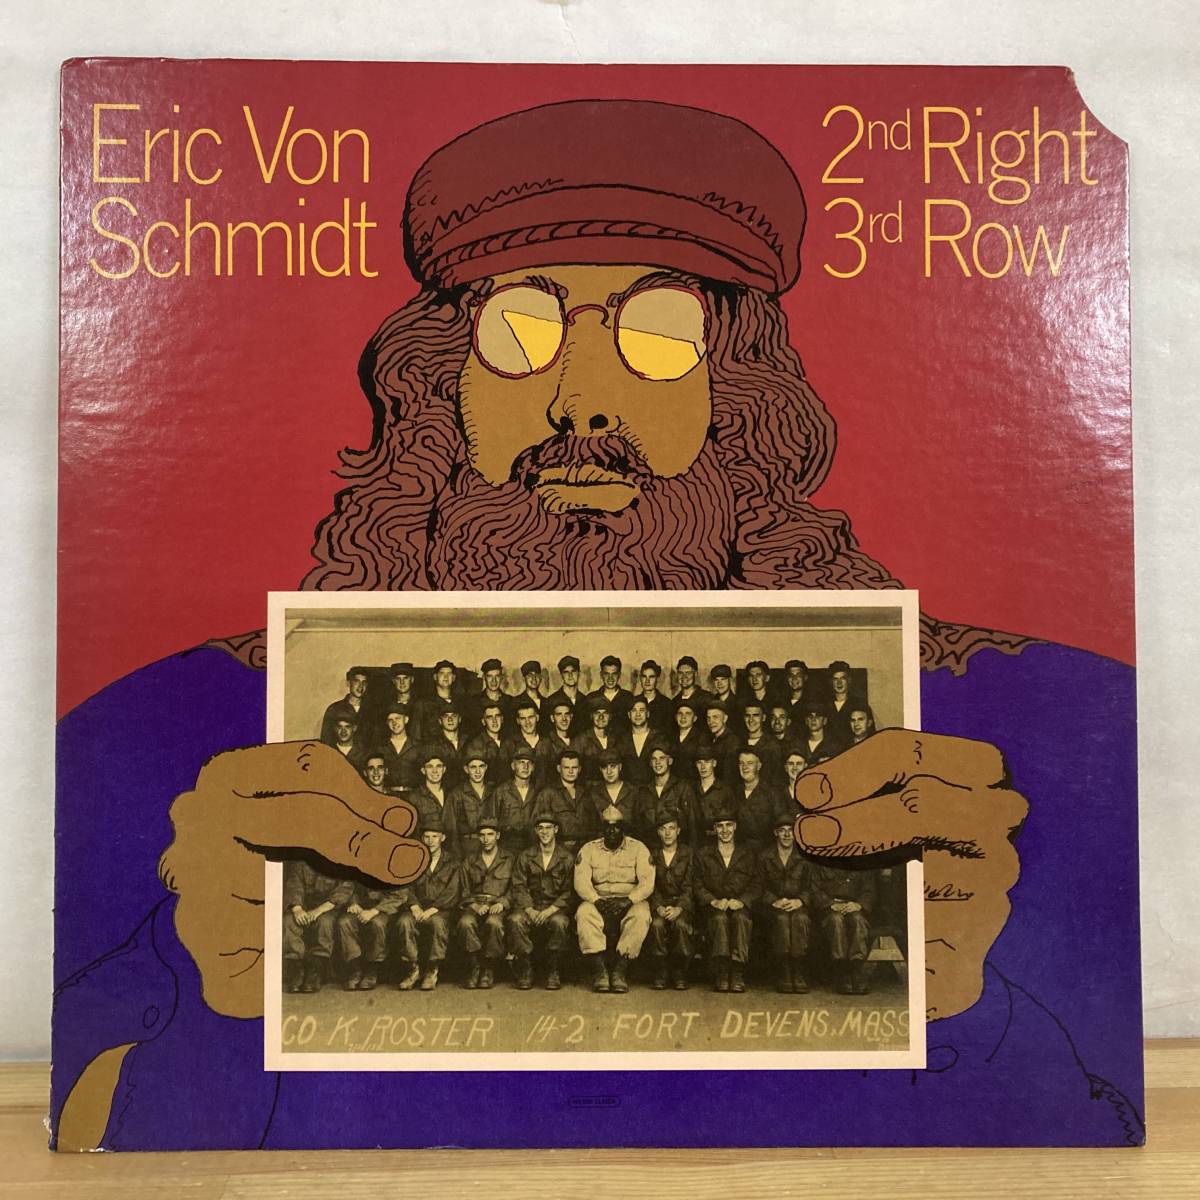 X7■【US盤/LP】Eric Von Schmidt エリック・フォン・シュミット / 2nd Right 3rd Row ● Poppy / PYS-5705 / USフォーク 231023_画像1